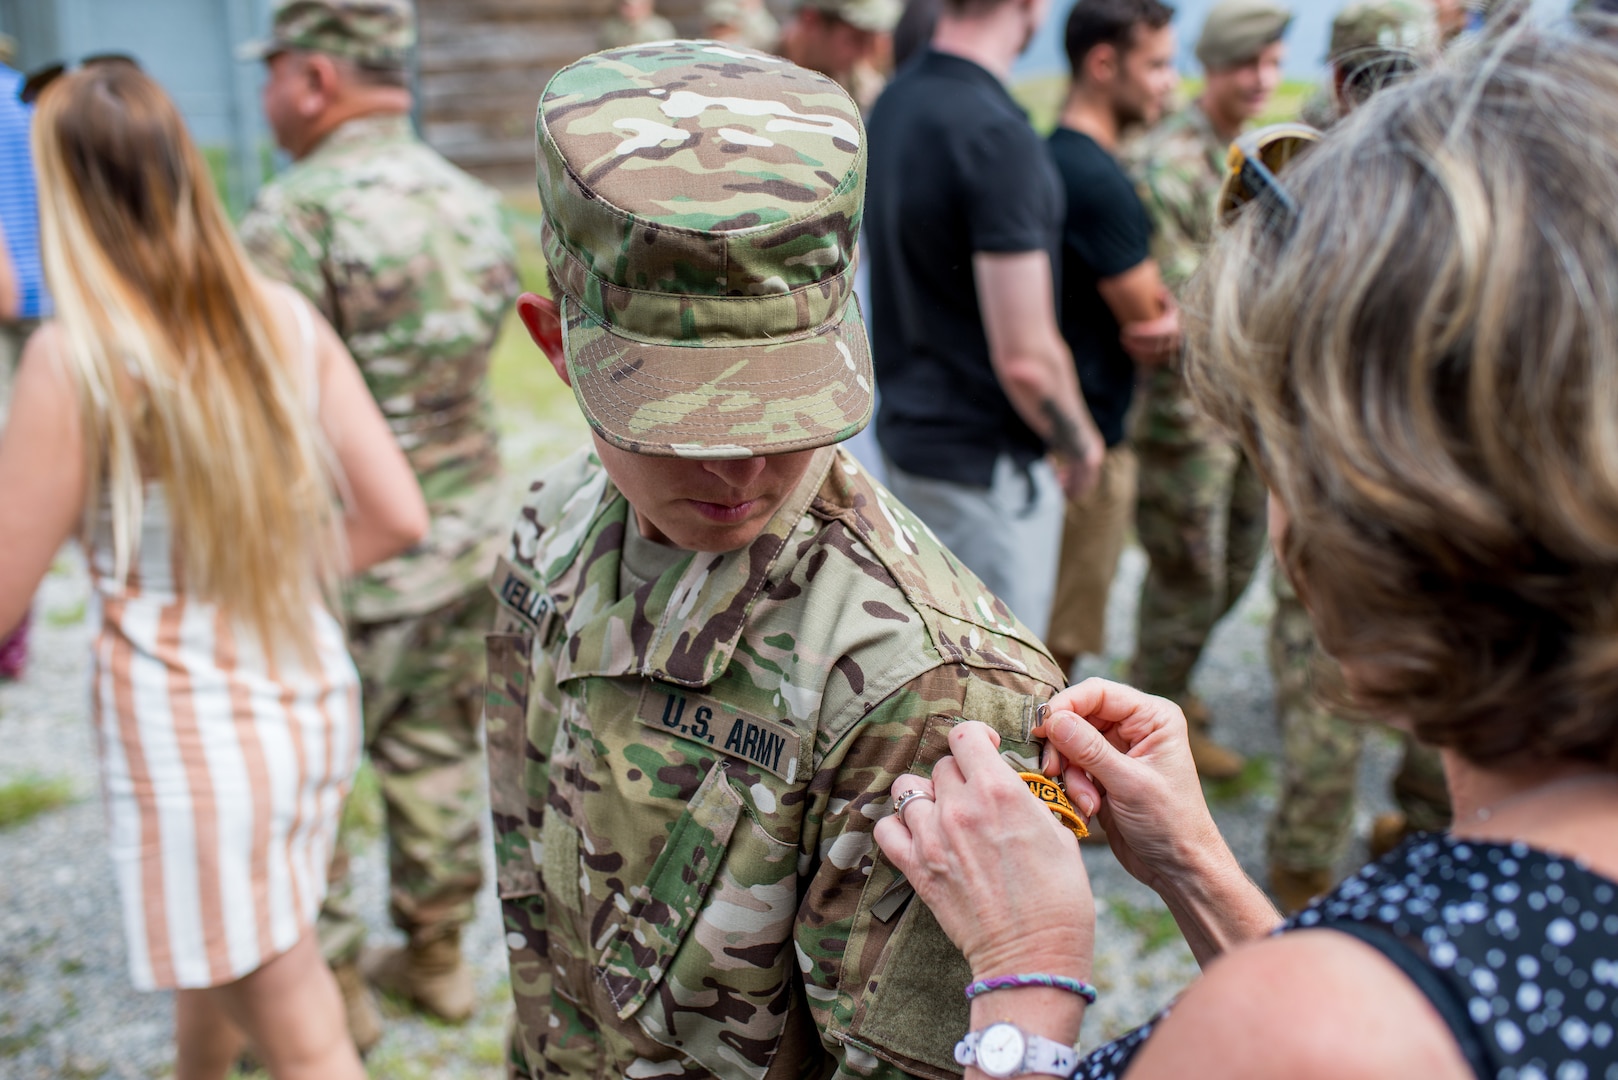 Staff Sgt. Amanda F. Kelley (left), assigned to the 1st Armored Division’s combat aviation brigade at Fort Bliss, Texas, gets her Ranger tab pinned on by a family member during her Ranger School graduation at Fort Benning, Georgia, Aug. 31, 2018. Kelley is the first enlisted woman to earn the Ranger tab.